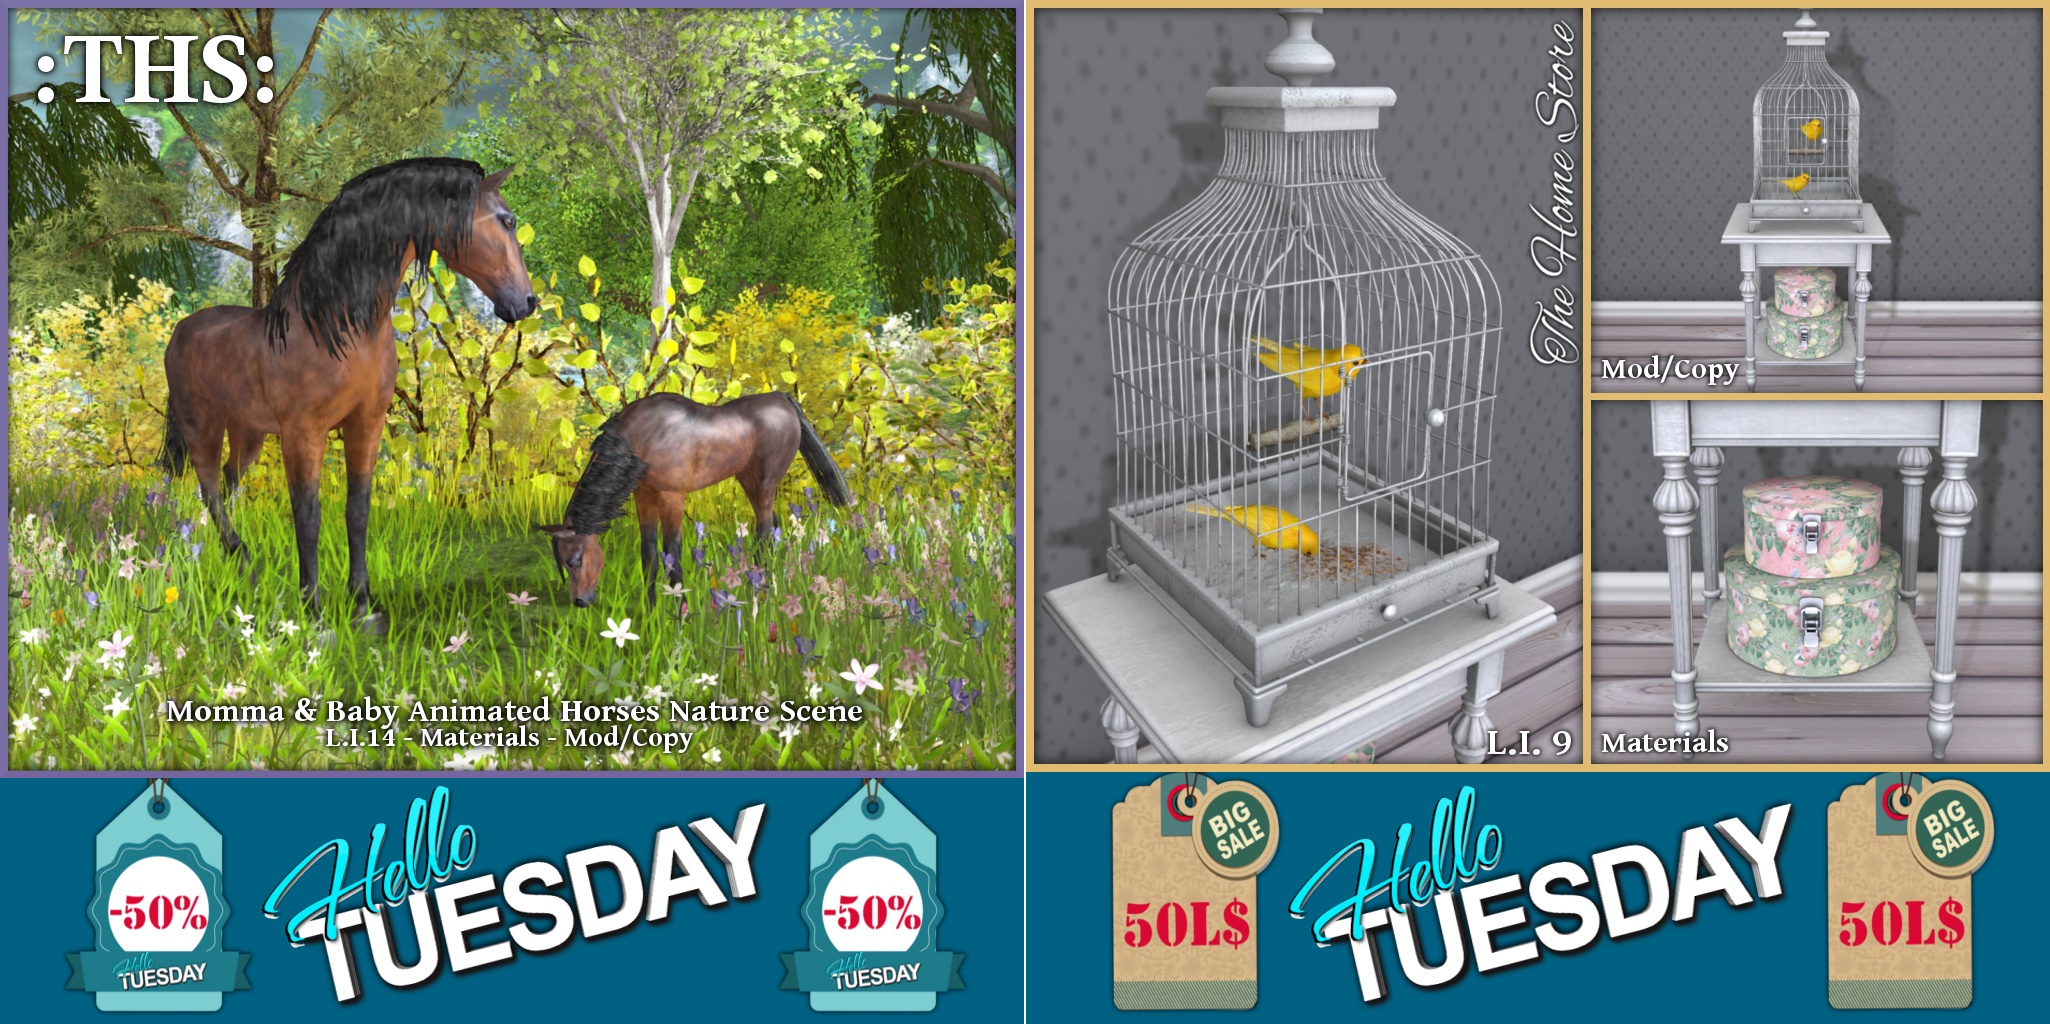 The Home Store – Momma & Baby Animated Horses Nature Scene & Vintage Birdcage with Canaries